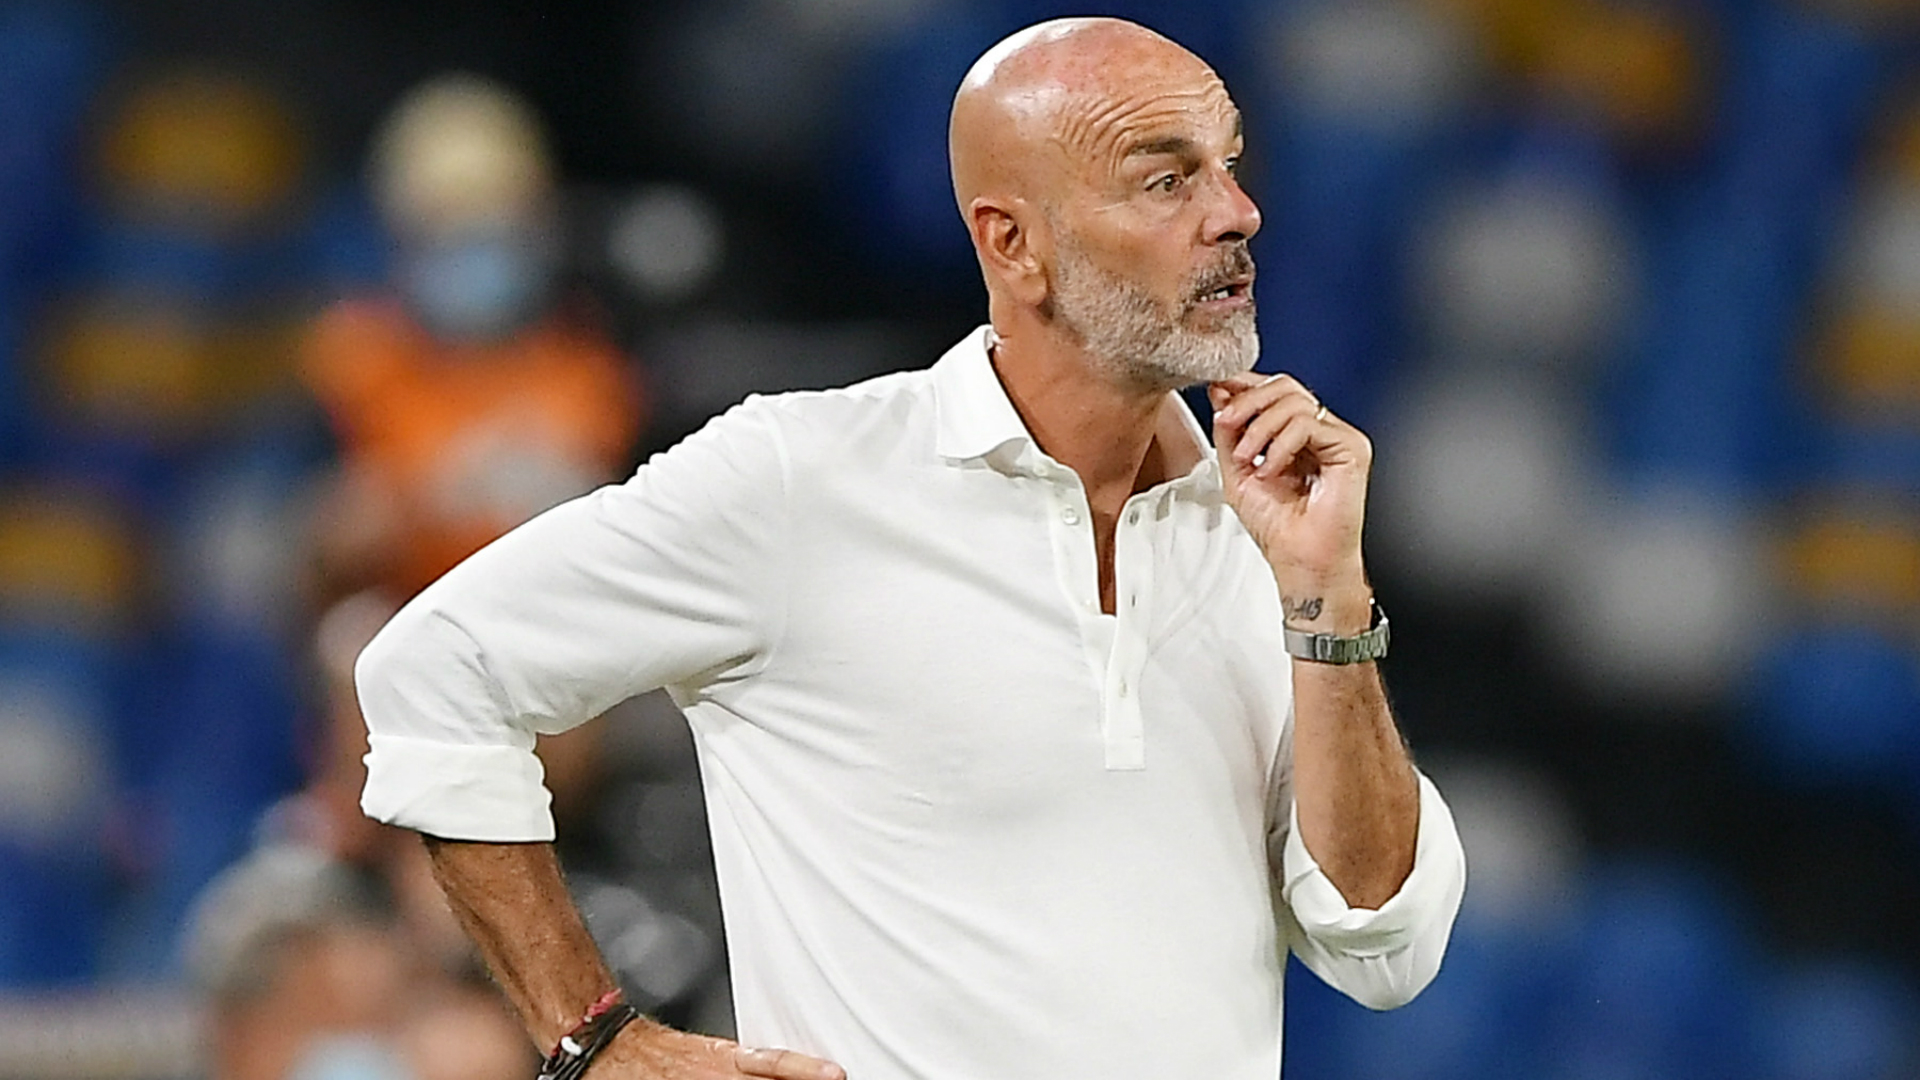 Stefano Pioli was asked about his future after 10-man Milan drew 2-2 at Napoli in Serie A on Sunday.